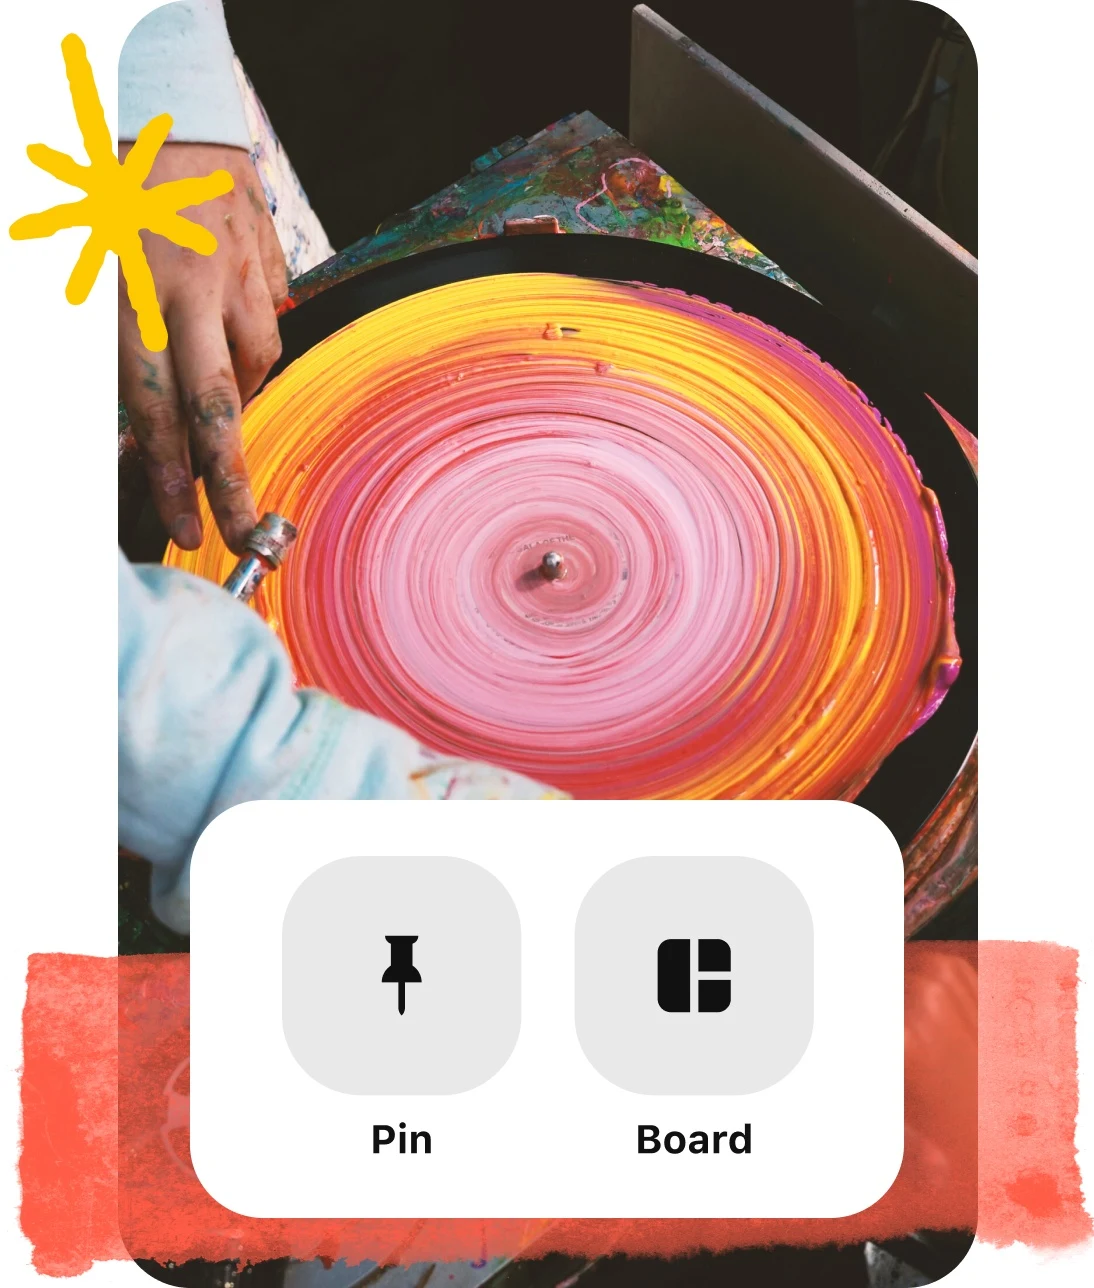 Collage of pin format buttons and image of hands spinning painted record